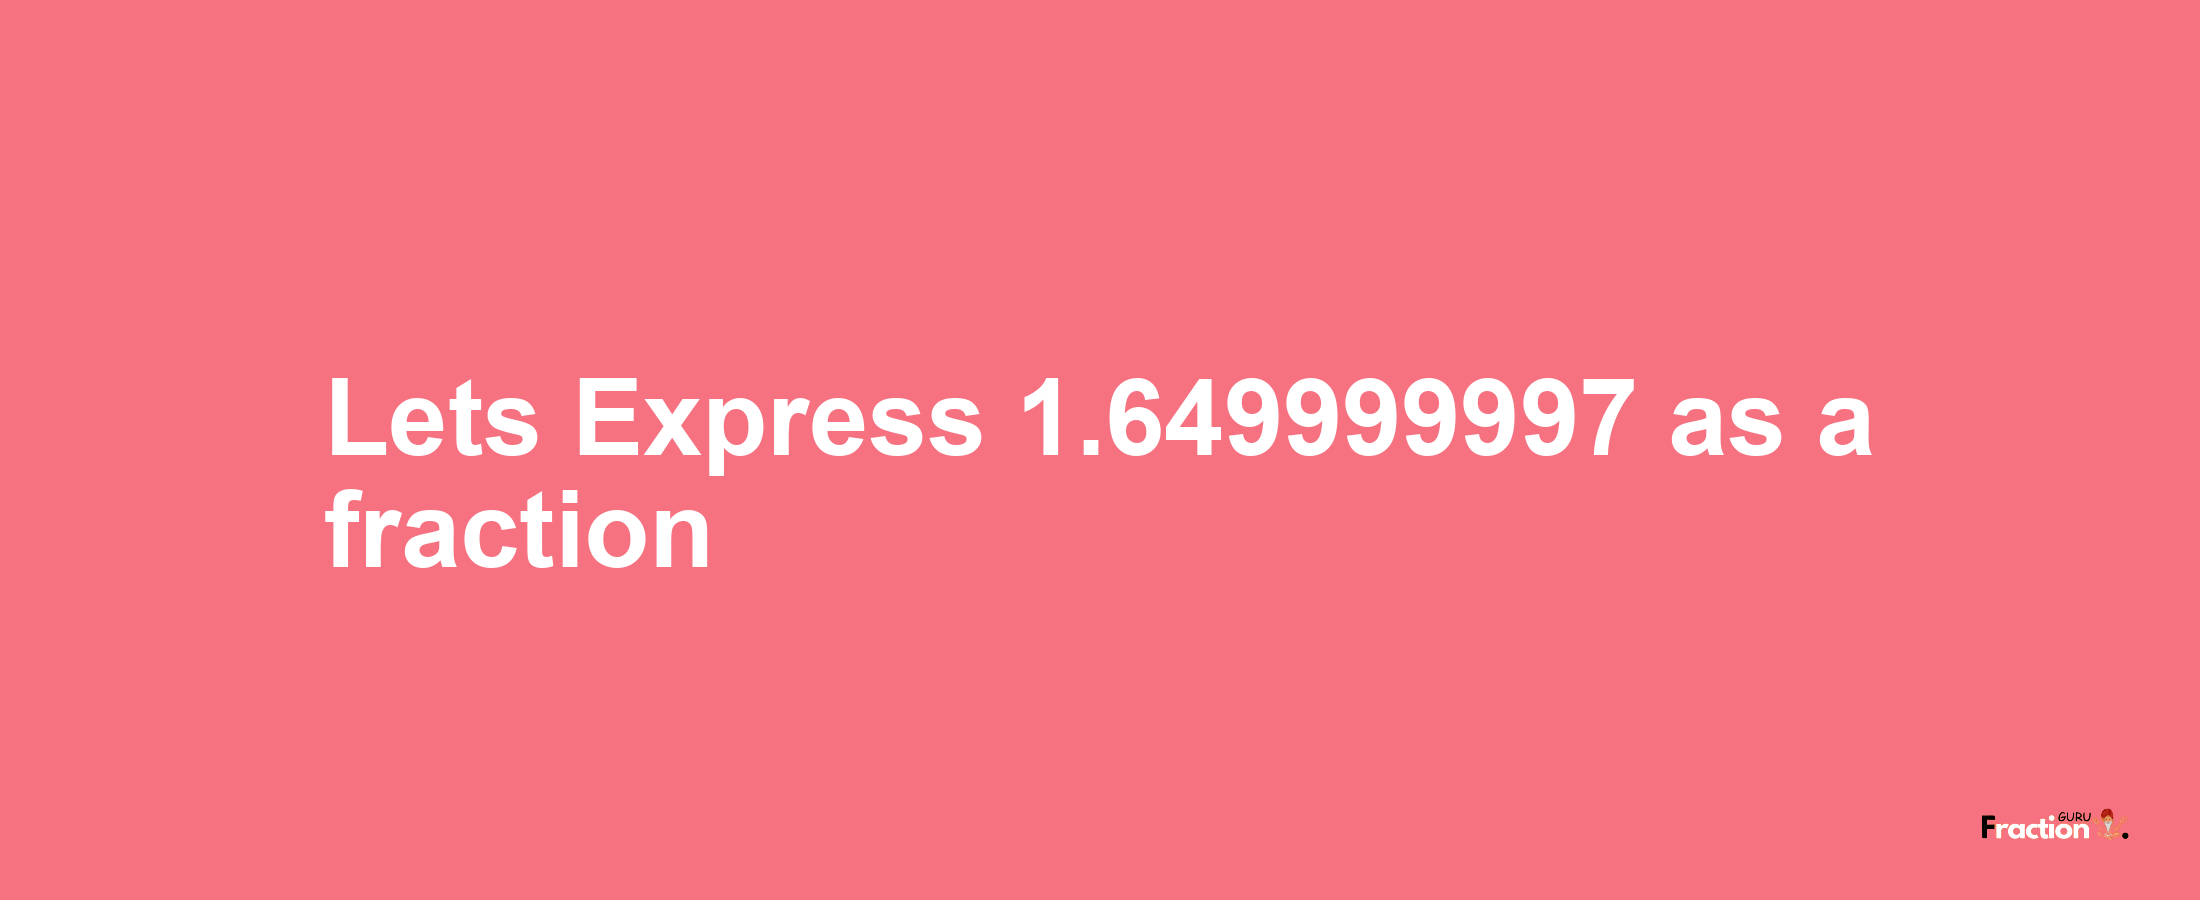 Lets Express 1.649999997 as afraction